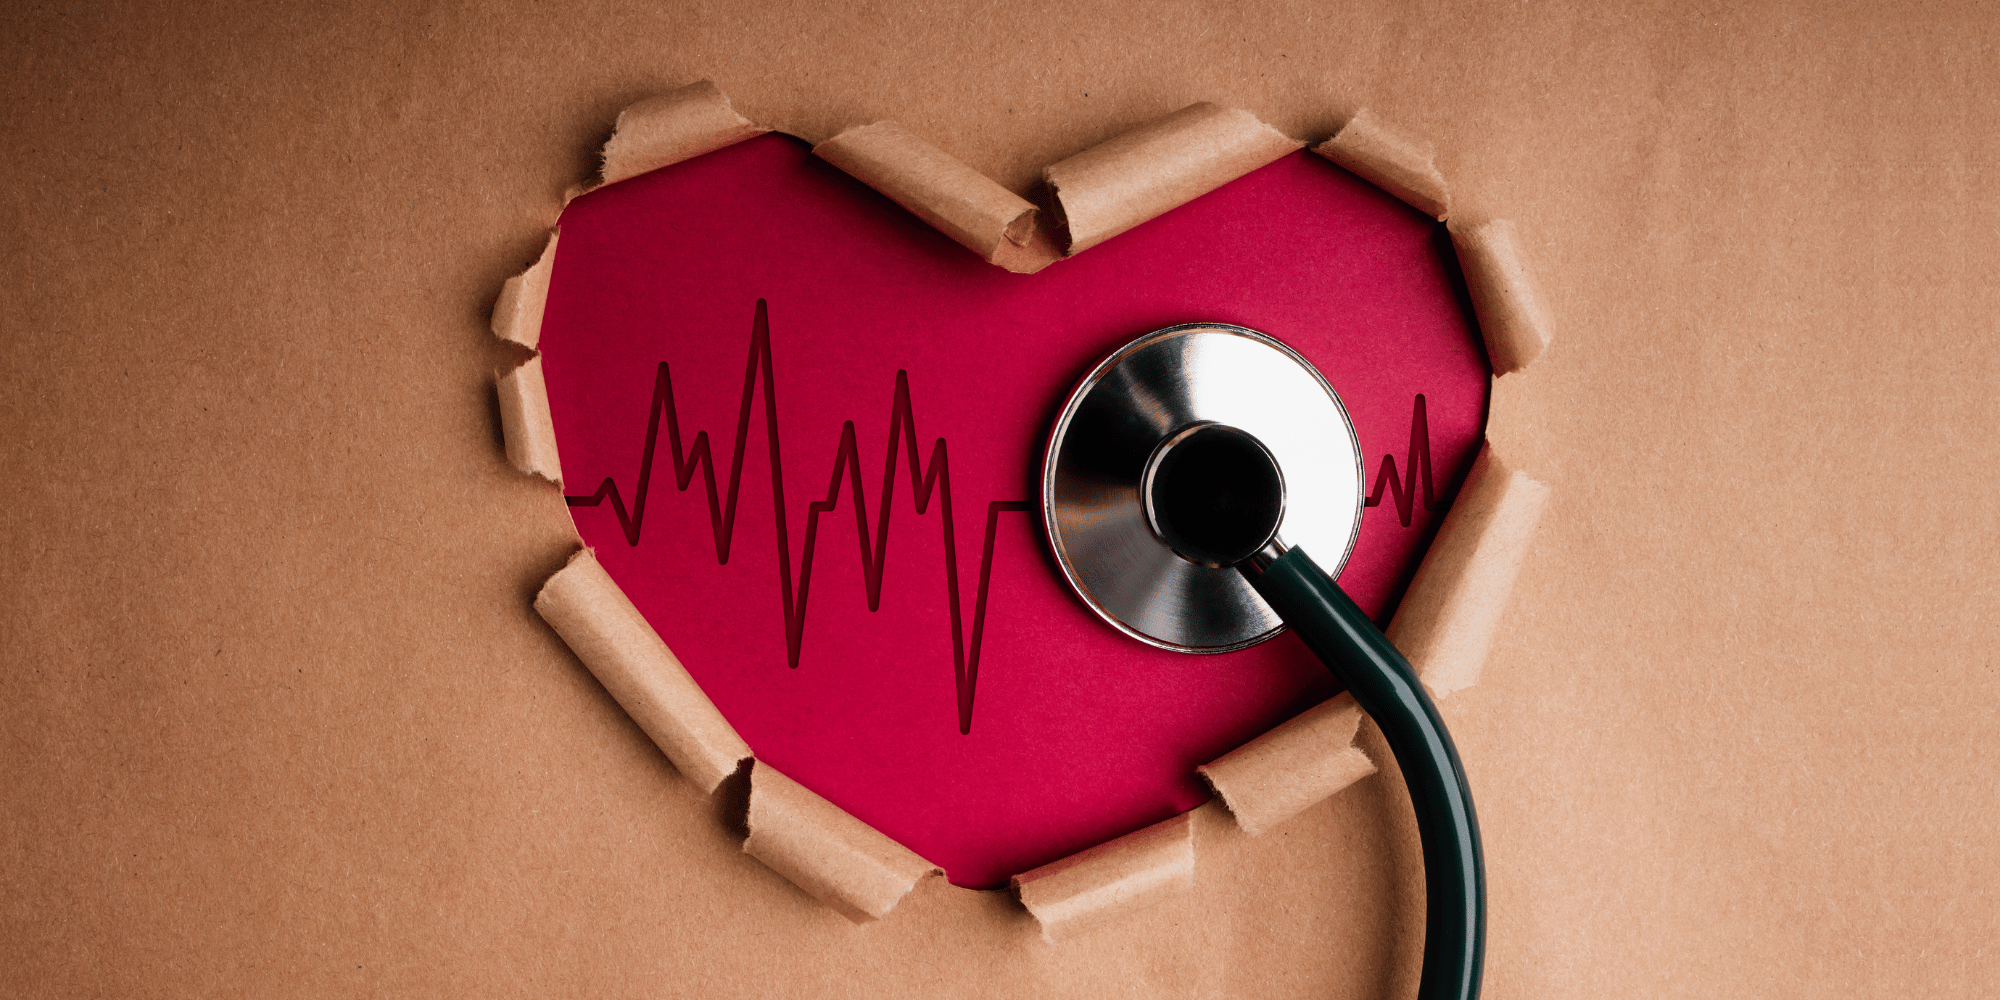 brown wrapping paper cut out in the shape of a heart to reveal a red heart underneath. A stethoscope is on the heart capturing the Electrocardiogram over the heart. 